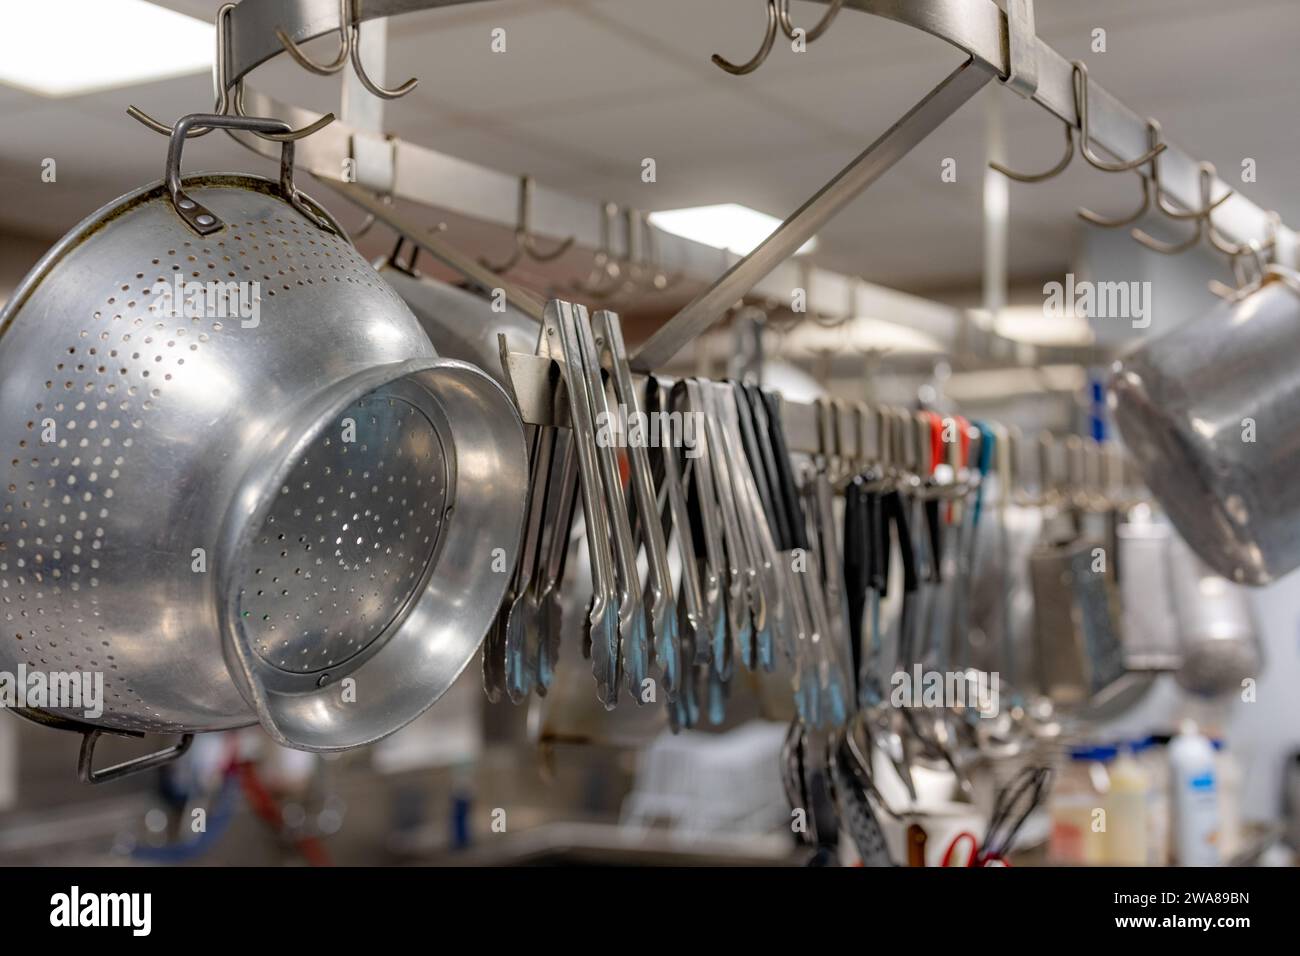 Stainless steel pots and pans and other cooking utensils hanging in a commercial industrial kitchen. Stock Photo